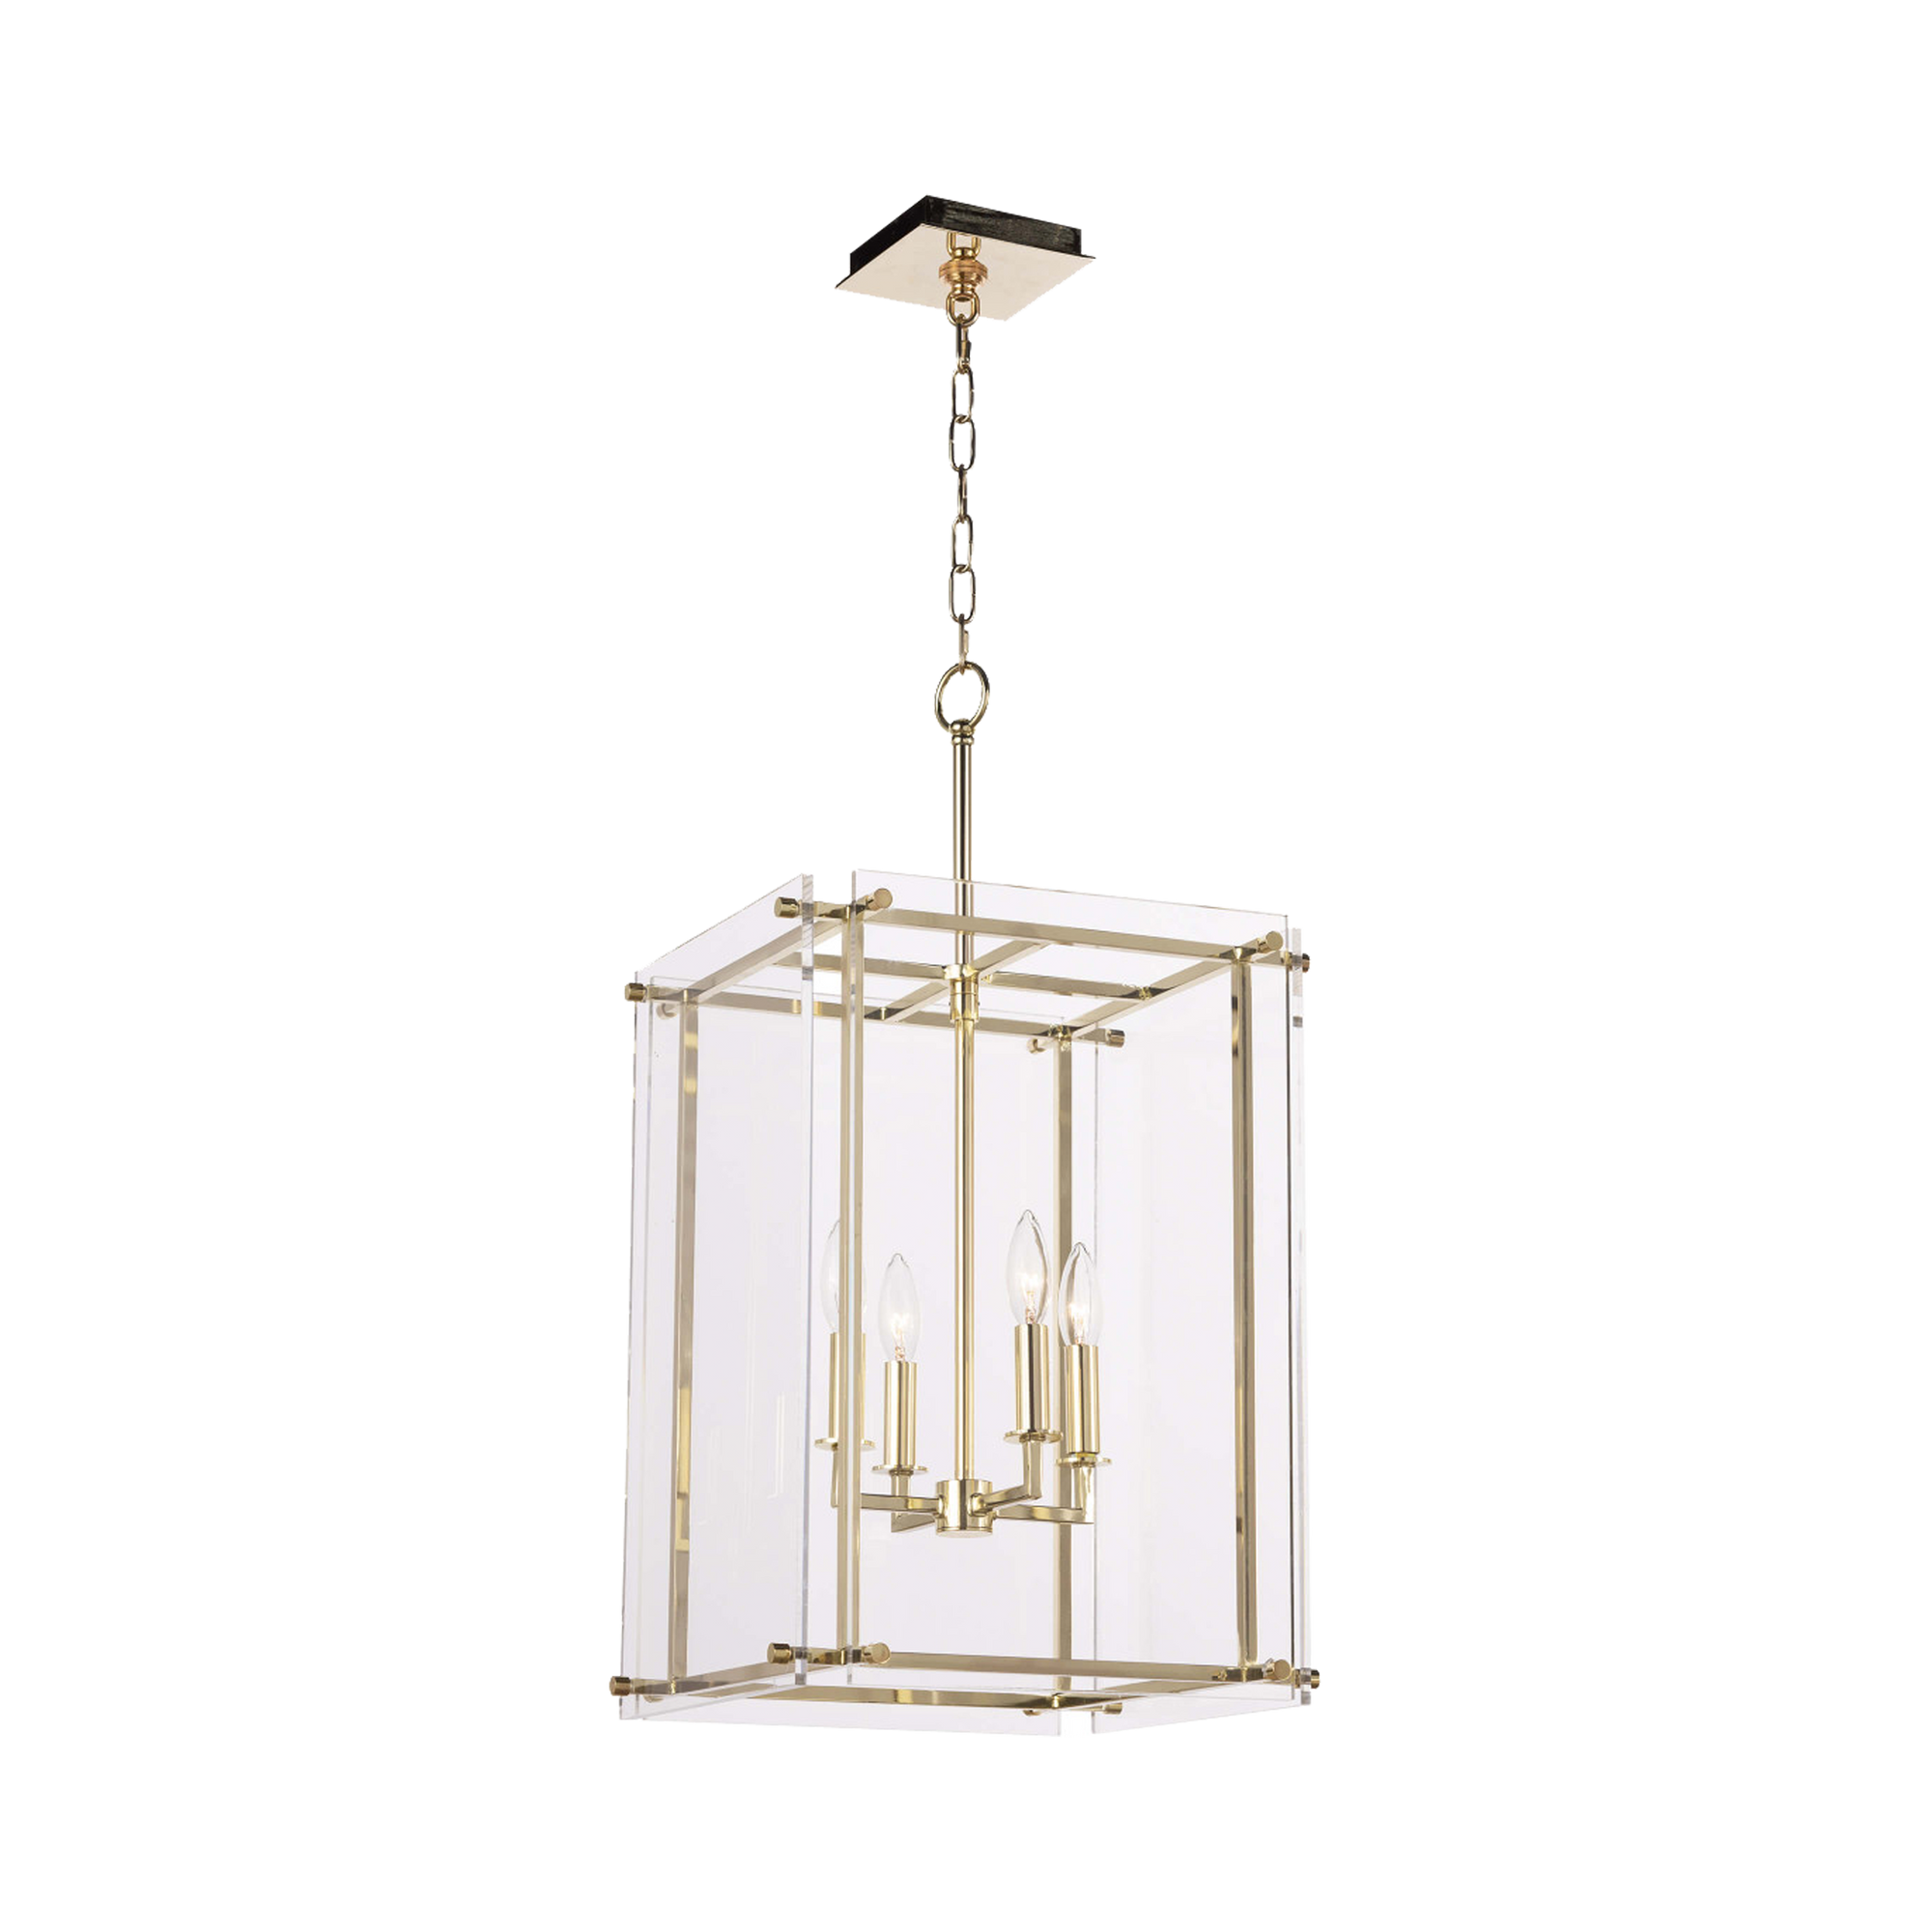 Modern details with a hint of classic sophistication come together seamlessly in this Lantern.